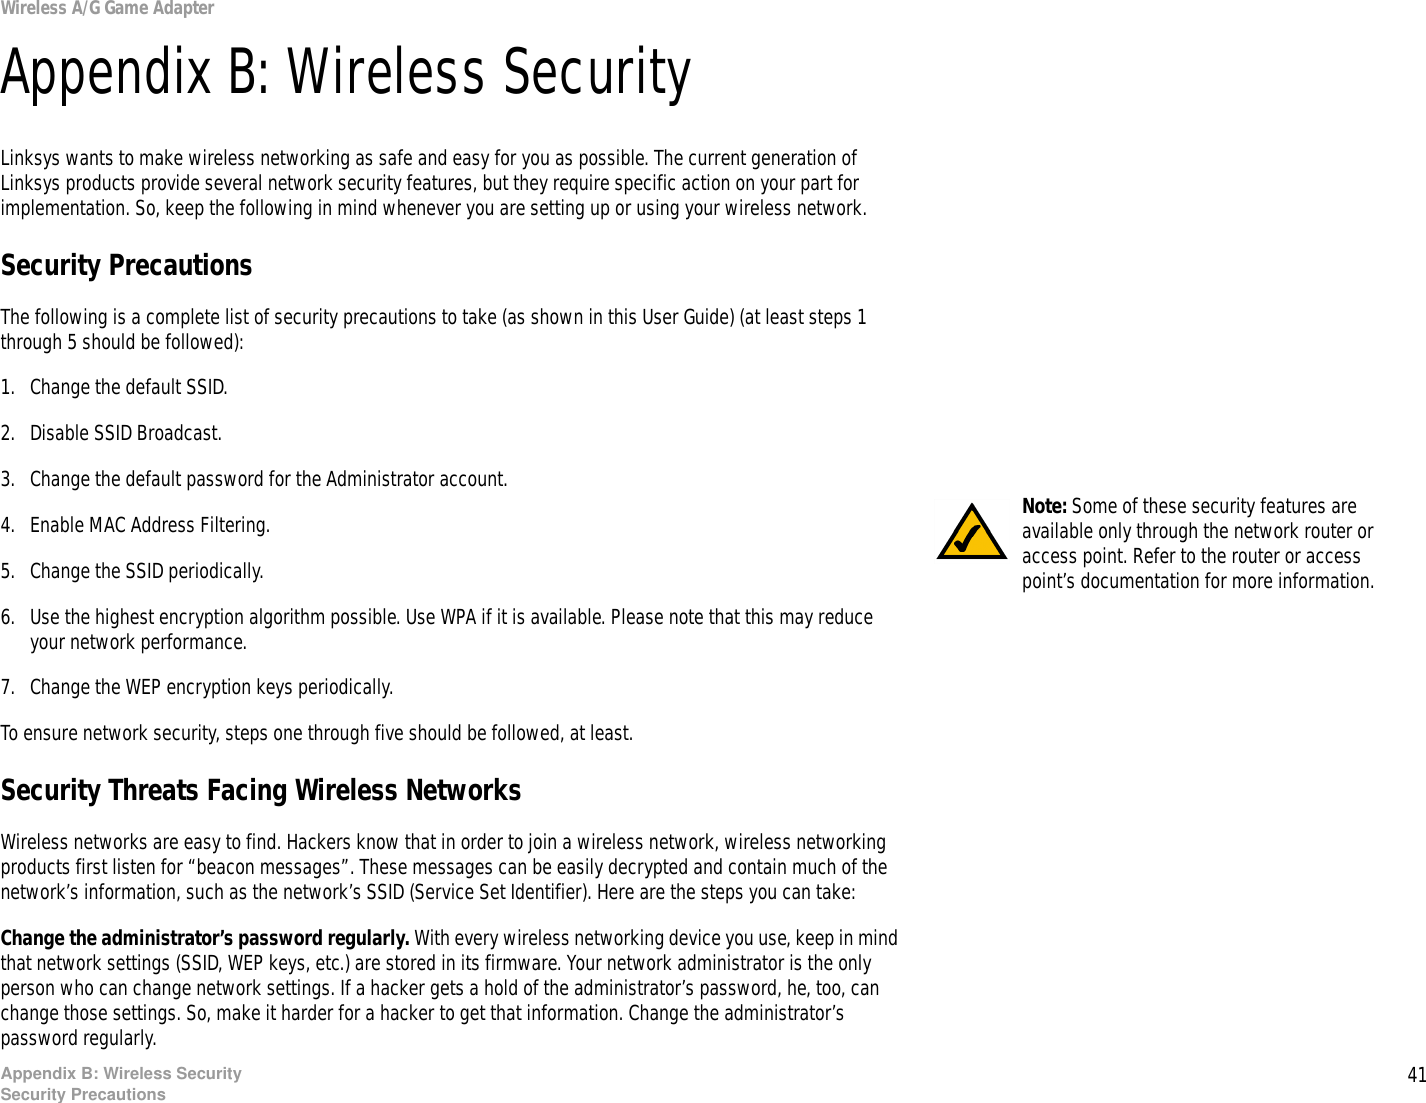 41Appendix B: Wireless SecuritySecurity PrecautionsWireless A/G Game AdapterAppendix B: Wireless SecurityLinksys wants to make wireless networking as safe and easy for you as possible. The current generation of Linksys products provide several network security features, but they require specific action on your part for implementation. So, keep the following in mind whenever you are setting up or using your wireless network.Security PrecautionsThe following is a complete list of security precautions to take (as shown in this User Guide) (at least steps 1 through 5 should be followed):1. Change the default SSID. 2. Disable SSID Broadcast. 3. Change the default password for the Administrator account. 4. Enable MAC Address Filtering. 5. Change the SSID periodically. 6. Use the highest encryption algorithm possible. Use WPA if it is available. Please note that this may reduce your network performance. 7. Change the WEP encryption keys periodically. To ensure network security, steps one through five should be followed, at least.Security Threats Facing Wireless Networks Wireless networks are easy to find. Hackers know that in order to join a wireless network, wireless networking products first listen for “beacon messages”. These messages can be easily decrypted and contain much of the network’s information, such as the network’s SSID (Service Set Identifier). Here are the steps you can take:Change the administrator’s password regularly. With every wireless networking device you use, keep in mind that network settings (SSID, WEP keys, etc.) are stored in its firmware. Your network administrator is the only person who can change network settings. If a hacker gets a hold of the administrator’s password, he, too, can change those settings. So, make it harder for a hacker to get that information. Change the administrator’s password regularly.Note: Some of these security features are available only through the network router or access point. Refer to the router or access point’s documentation for more information.